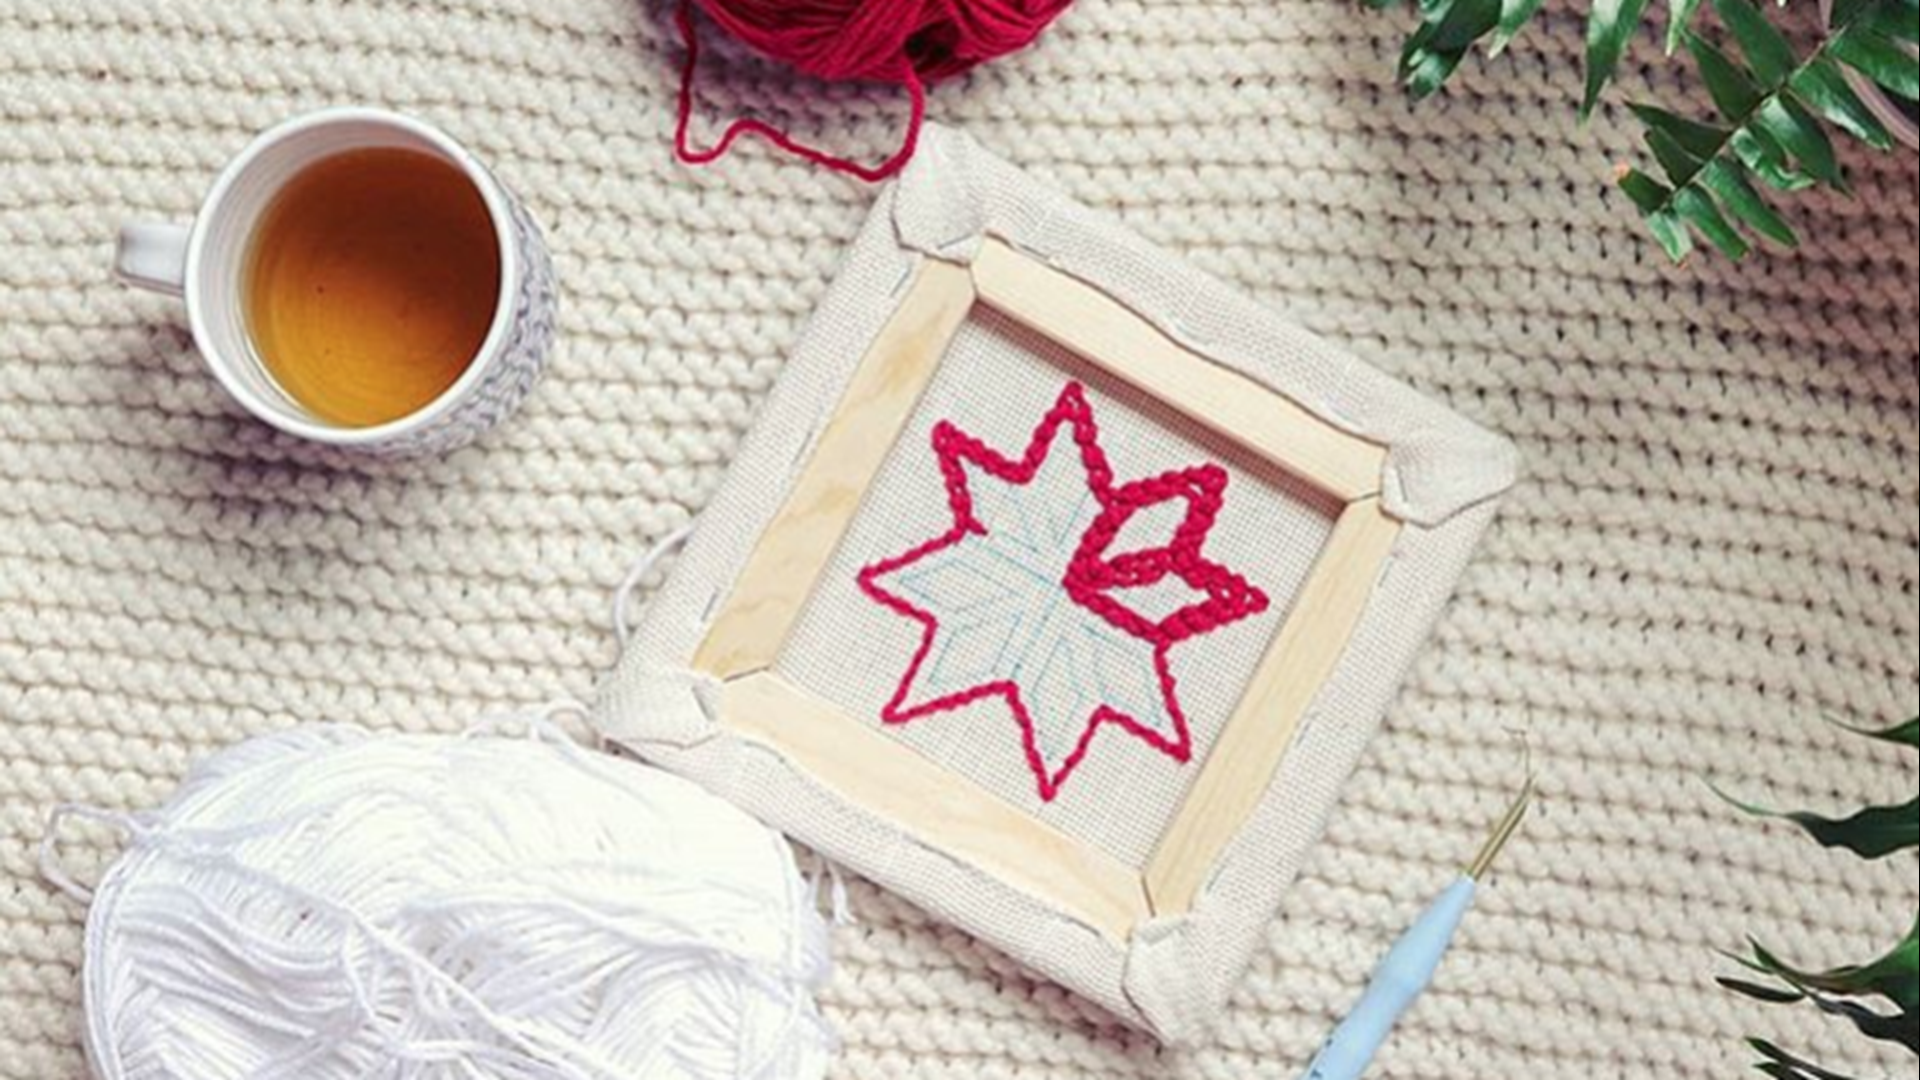 Seattle artist Andie Solar got hooked on rug hooking and now it's her full time gig. Her website Myra & Jean has classes and kits to get you started in punch needle.